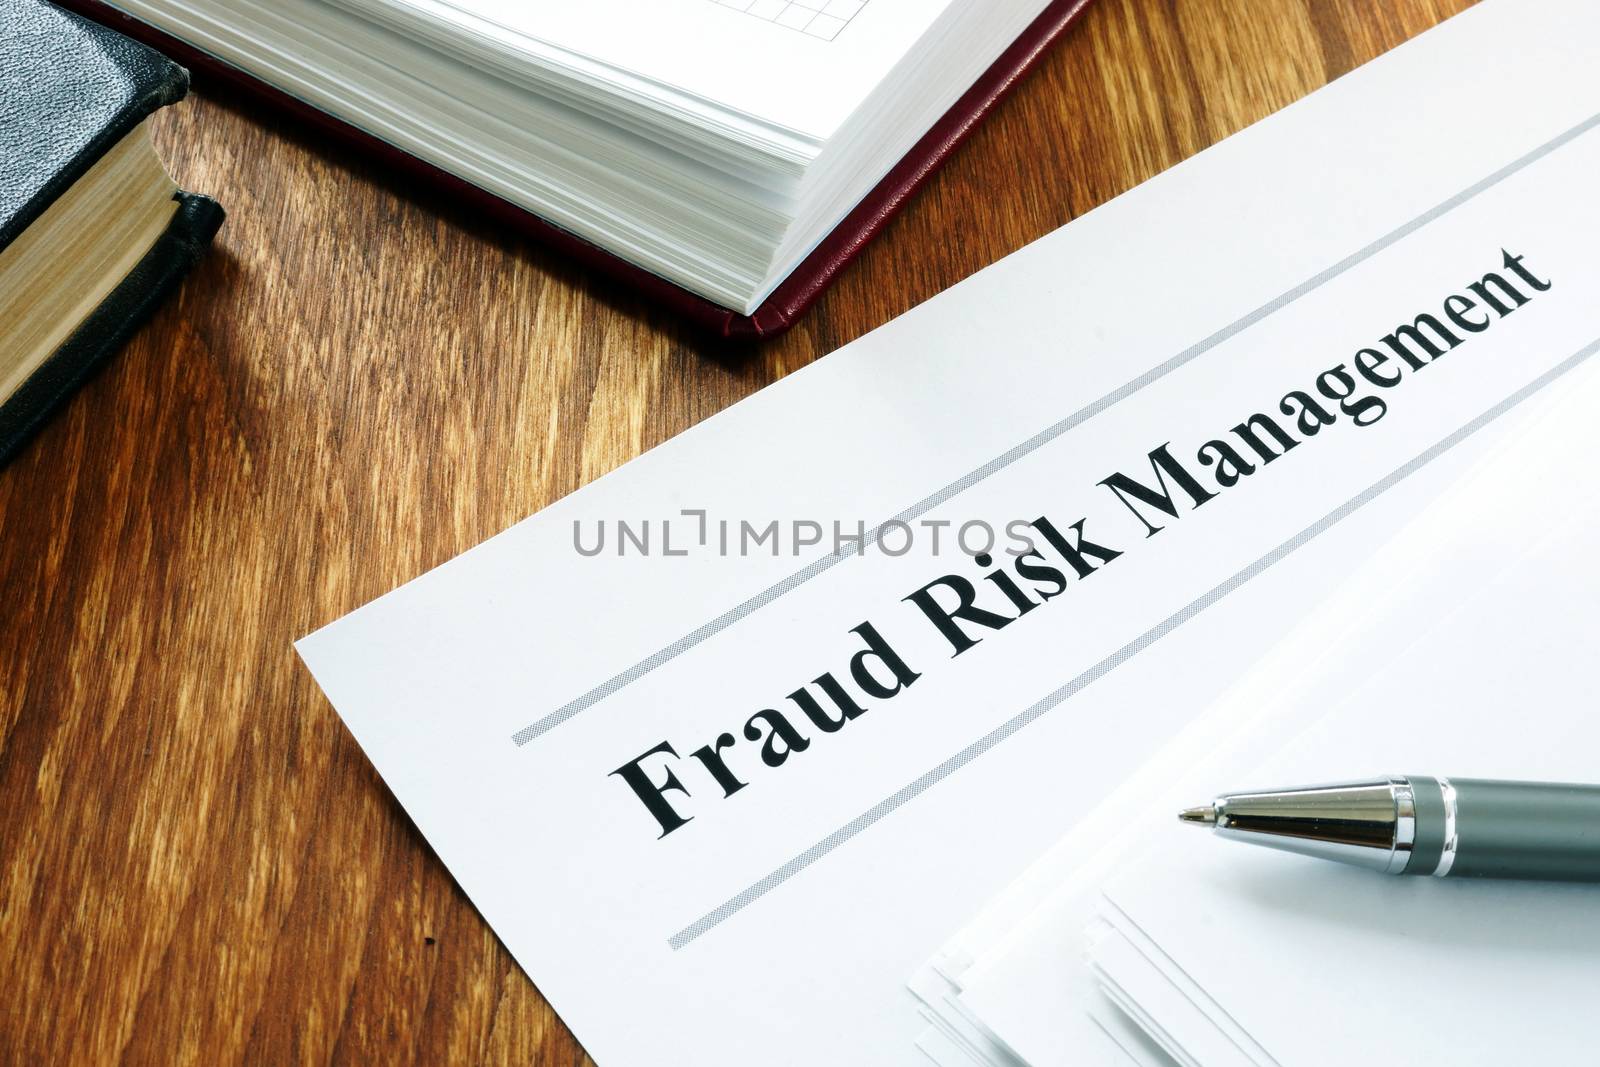 Documents about Fraud risk management and pen. by designer491